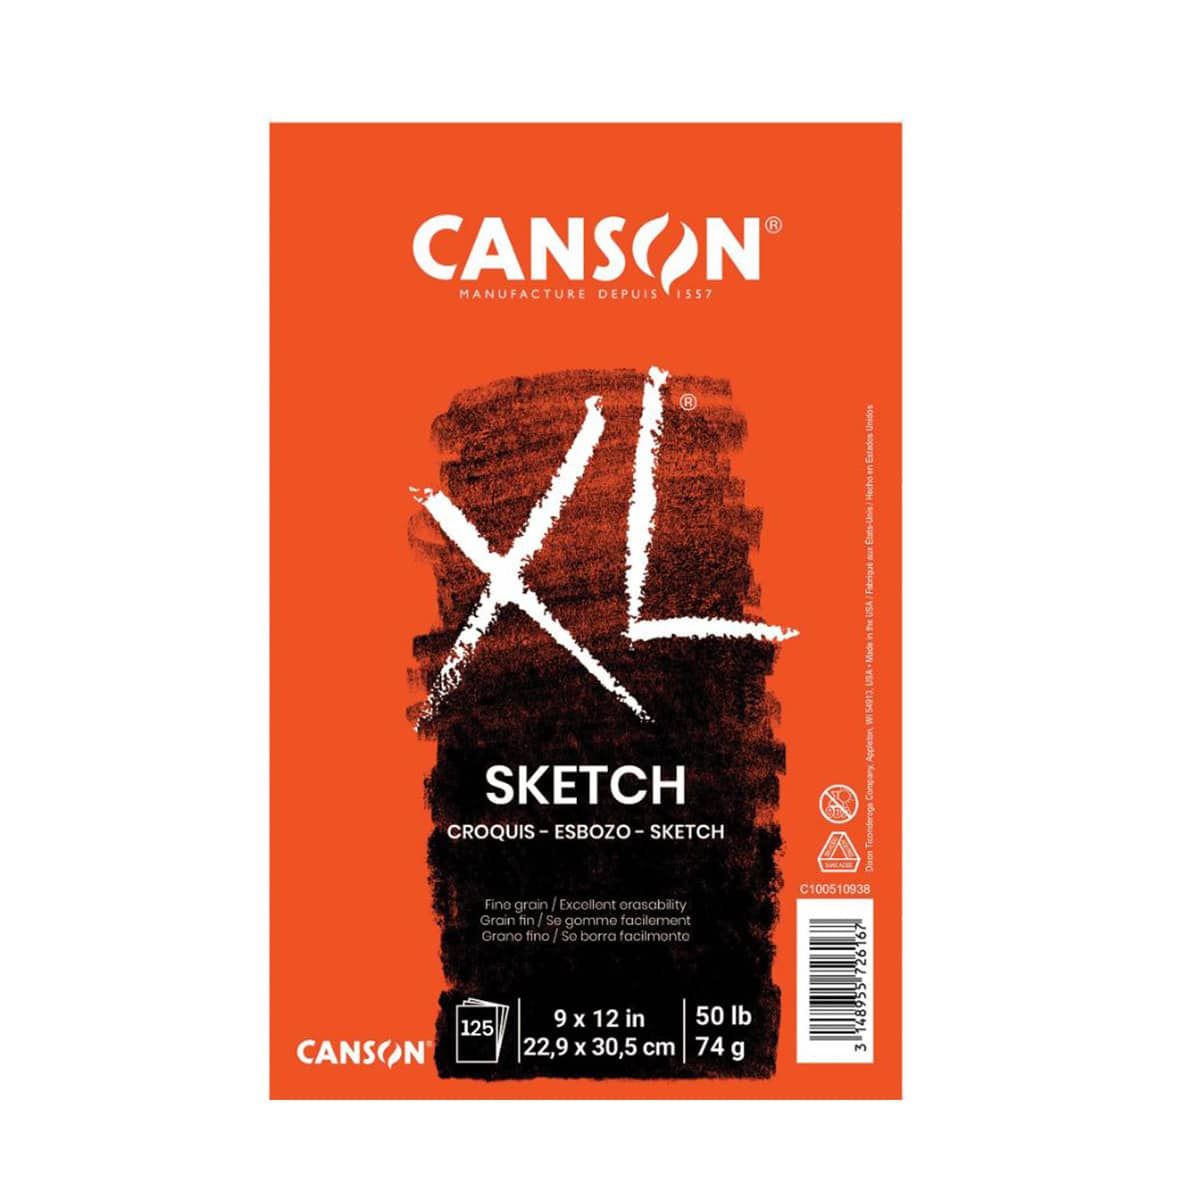 Canson Biggie Jumbo Sketch Pads Size 9 x 12 inch with 125 Sheets